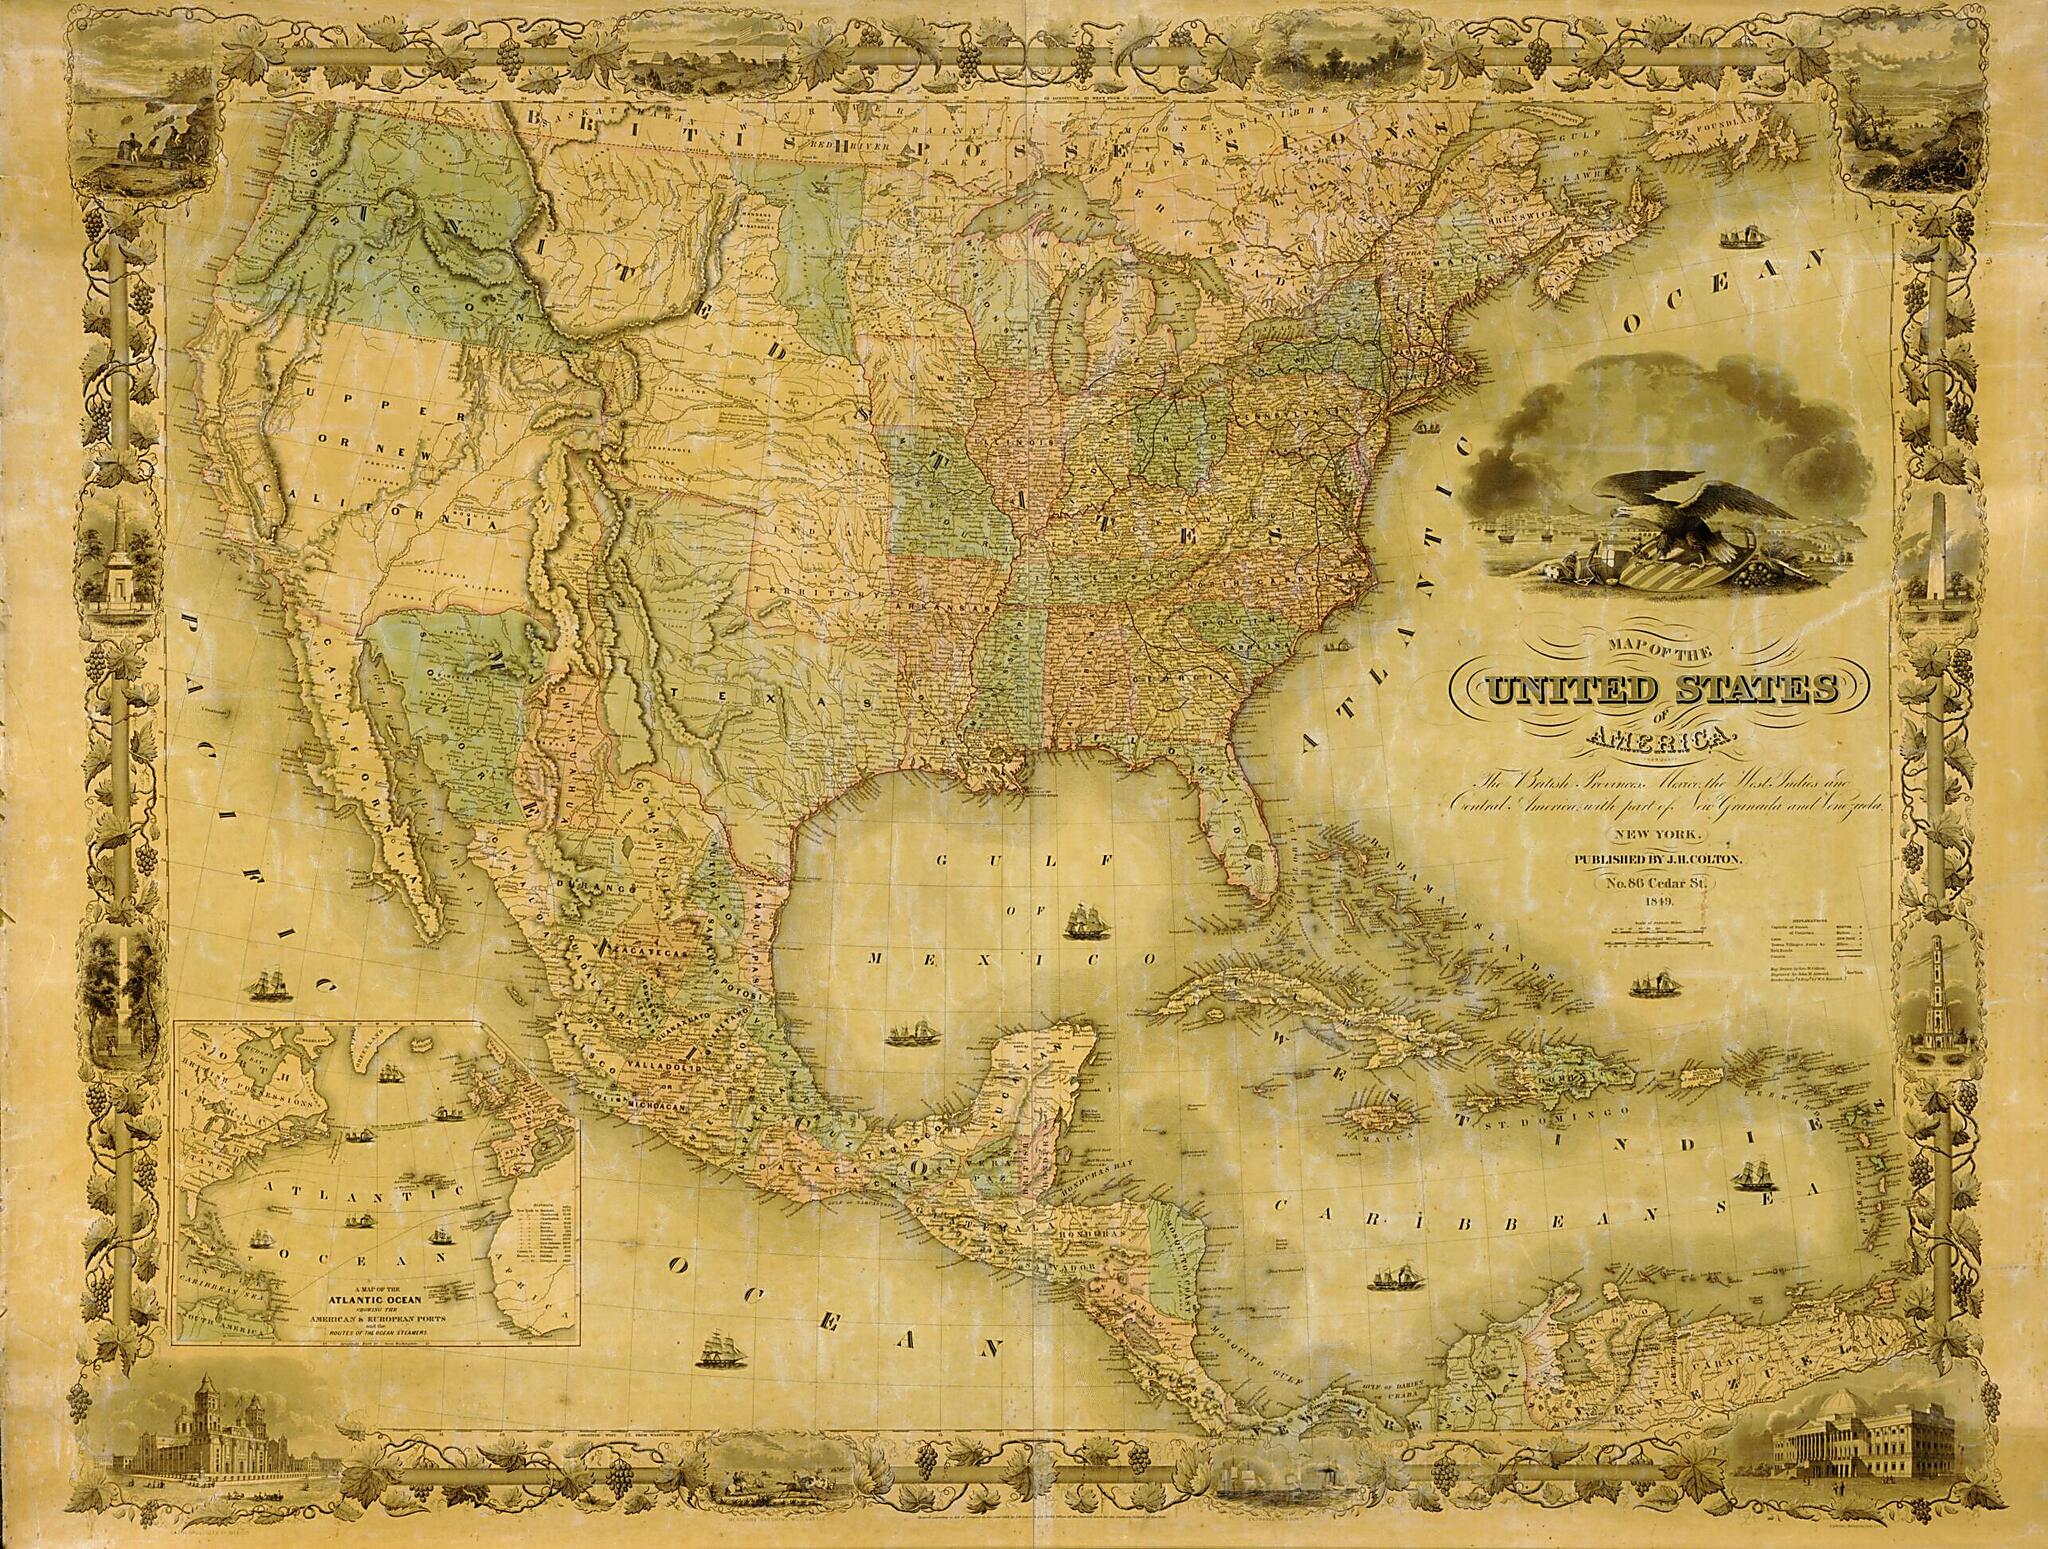 This old map of Map of the United States of America, the British Provinces, Mexico, the West Indies and Central America, With Part of New Granada and Venezuela from 1849 was created by John M. Atwood, William S. Barnard, G. Woolworth (George Woolworth) C